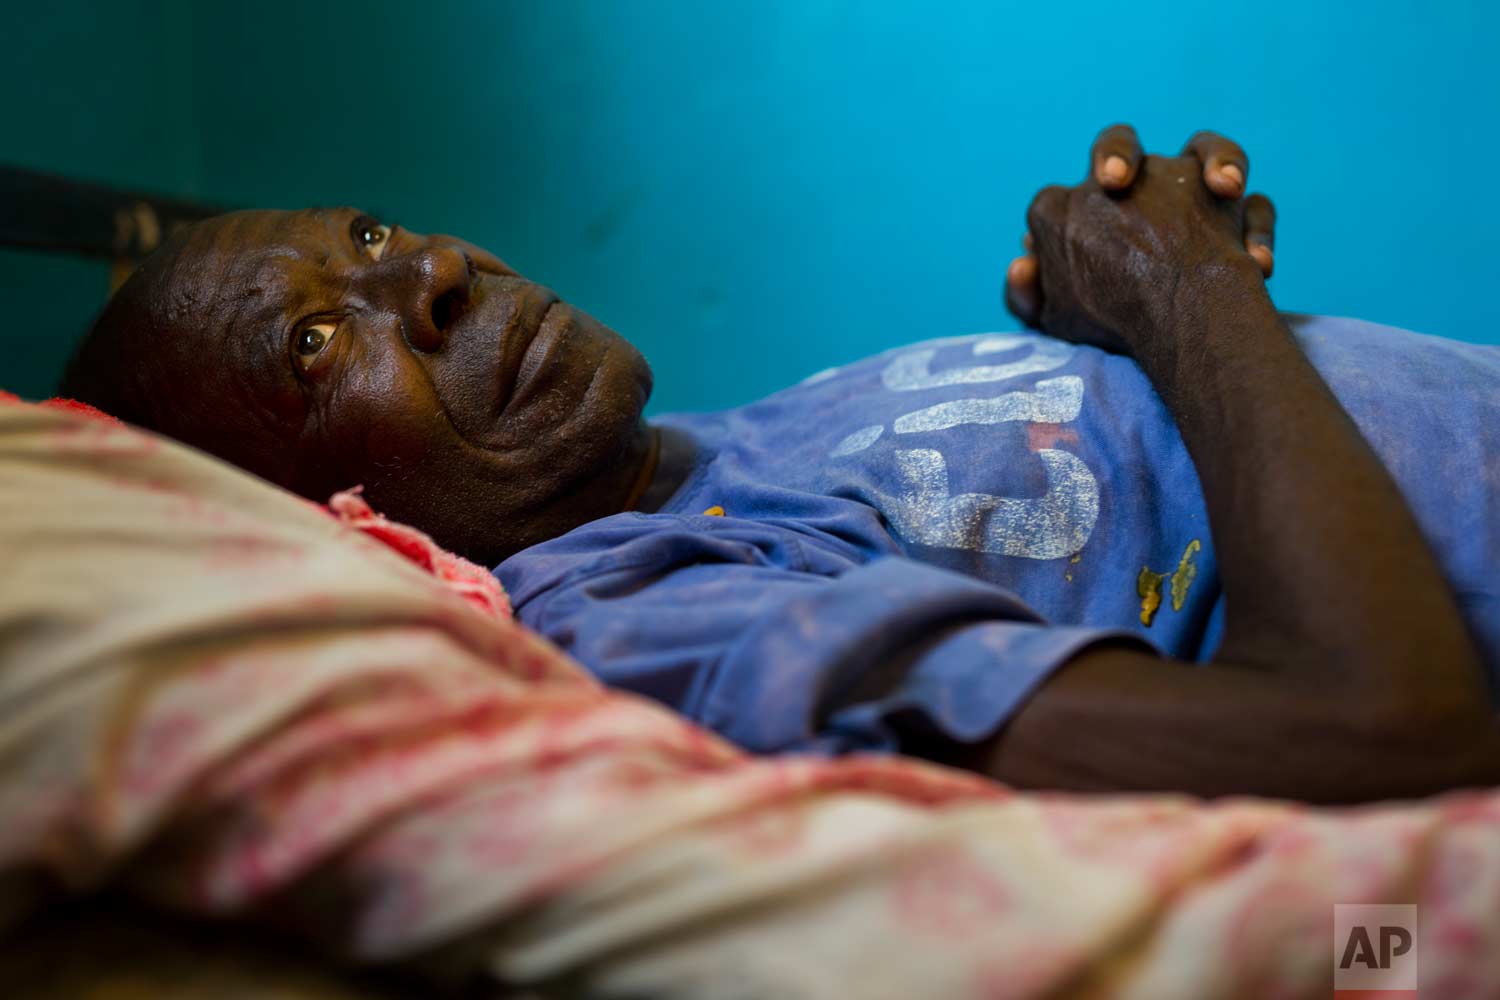  Gabriel Mutamba lies on his hospital bed at the Katuba Reference Hospital in Lubumbashi, Democratic Republic of the Congo on Monday, Aug. 13, 2018. Mutamba, in his 80s, was first brought to the hospital in 2017 by a church group that found him with 